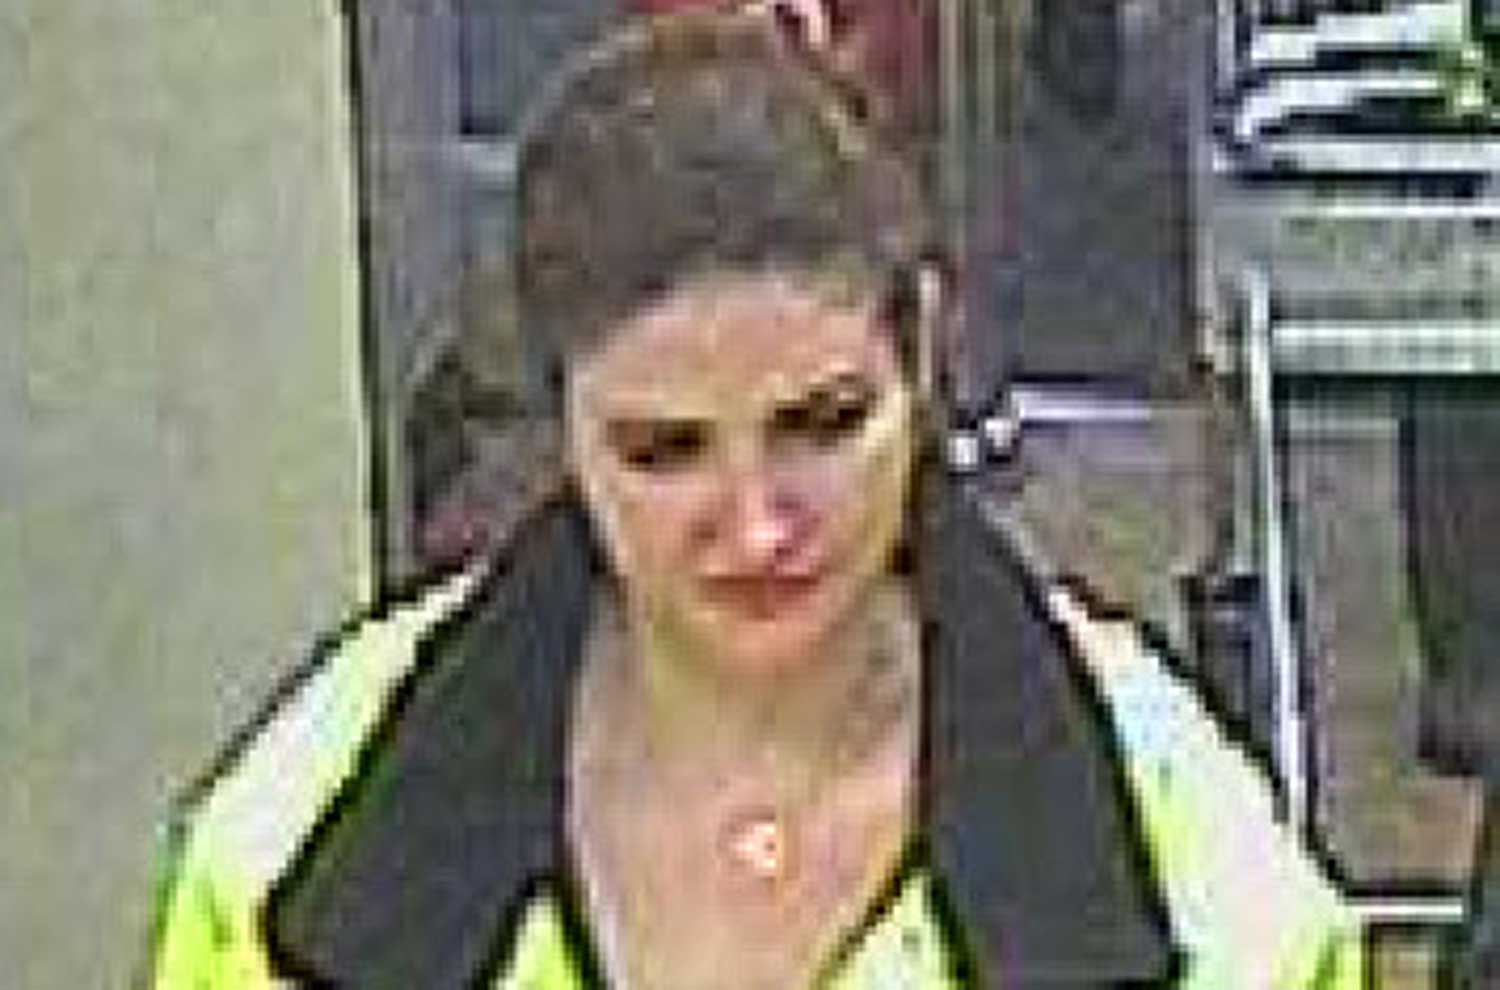 North Yorkshire Police is appealing for information to help identify two women following a theft in Harrogate